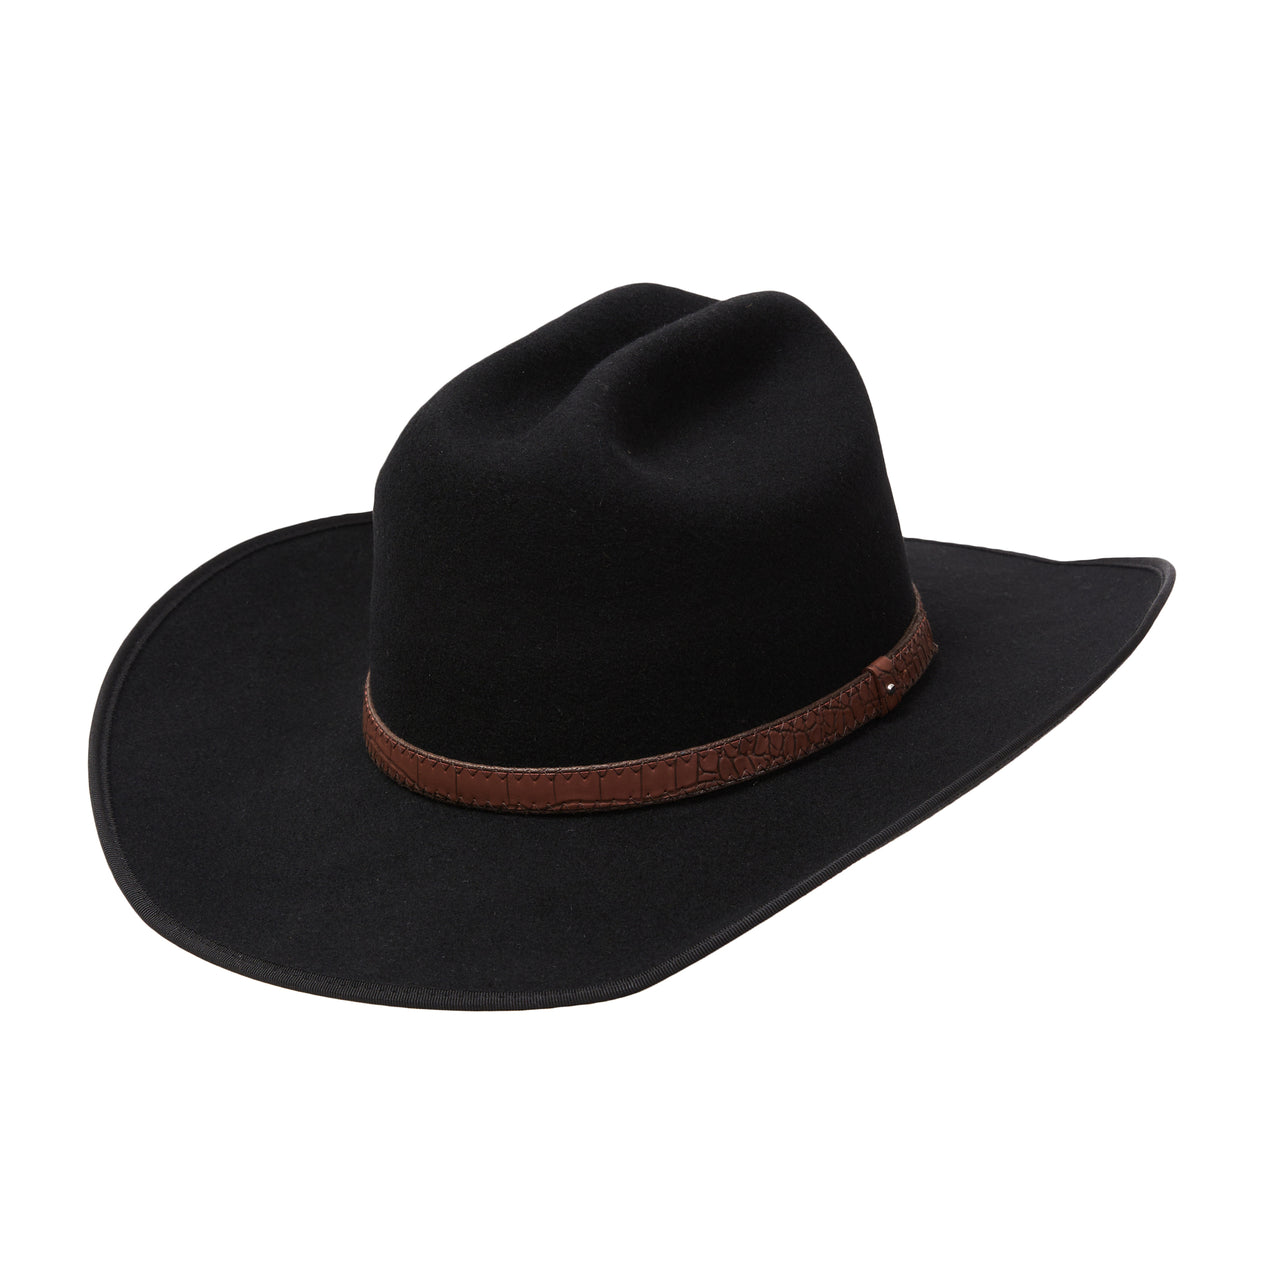 CITY HATTERS Rodeo hat